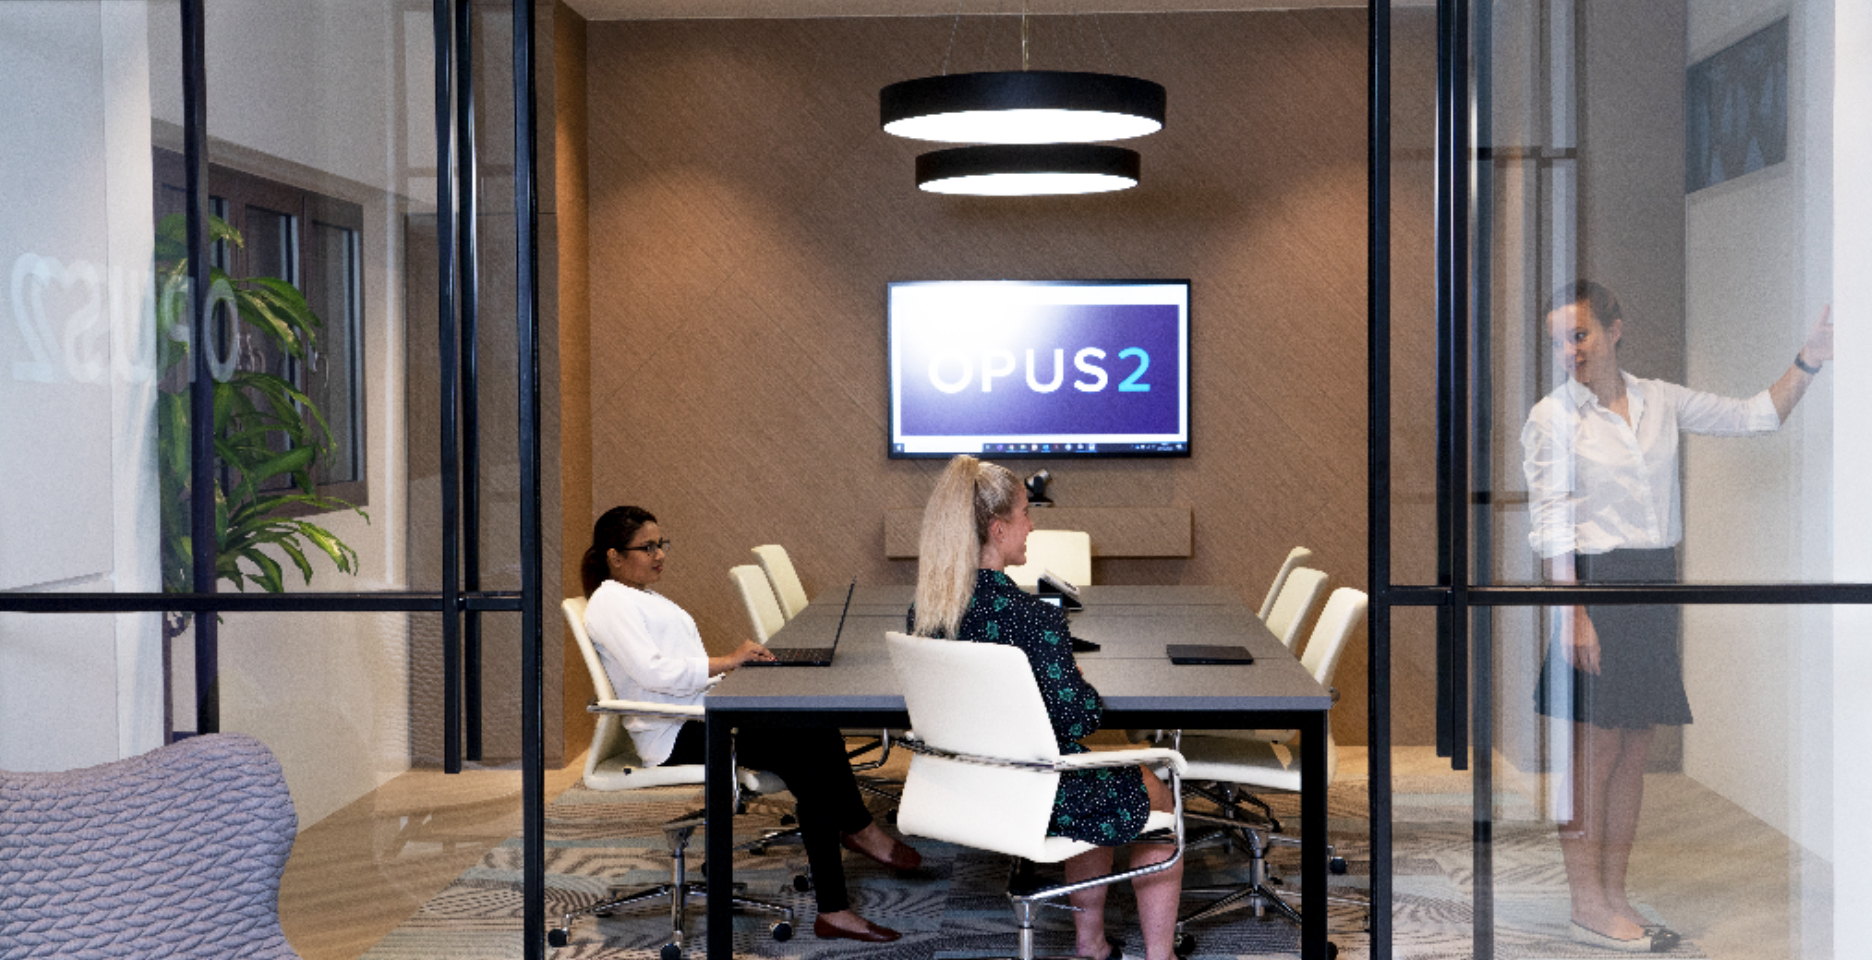 Opus 2 modern meeting space with three individuals brainstorming and writing on a white board